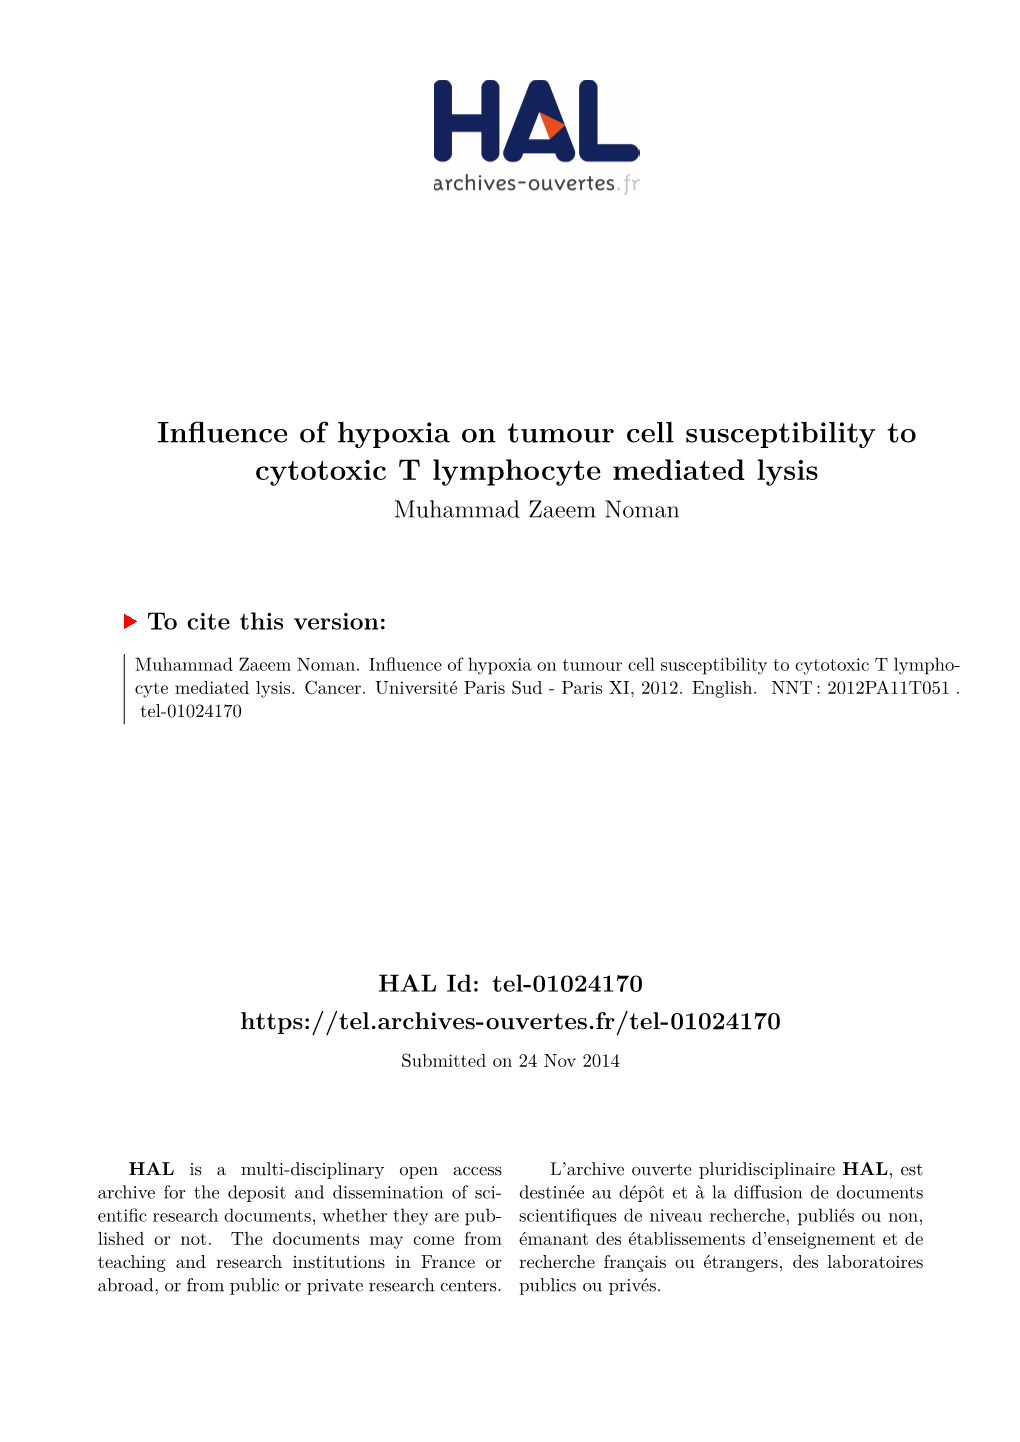 Influence of Hypoxia on Tumour Cell Susceptibility to Cytotoxic T Lymphocyte Mediated Lysis Muhammad Zaeem Noman